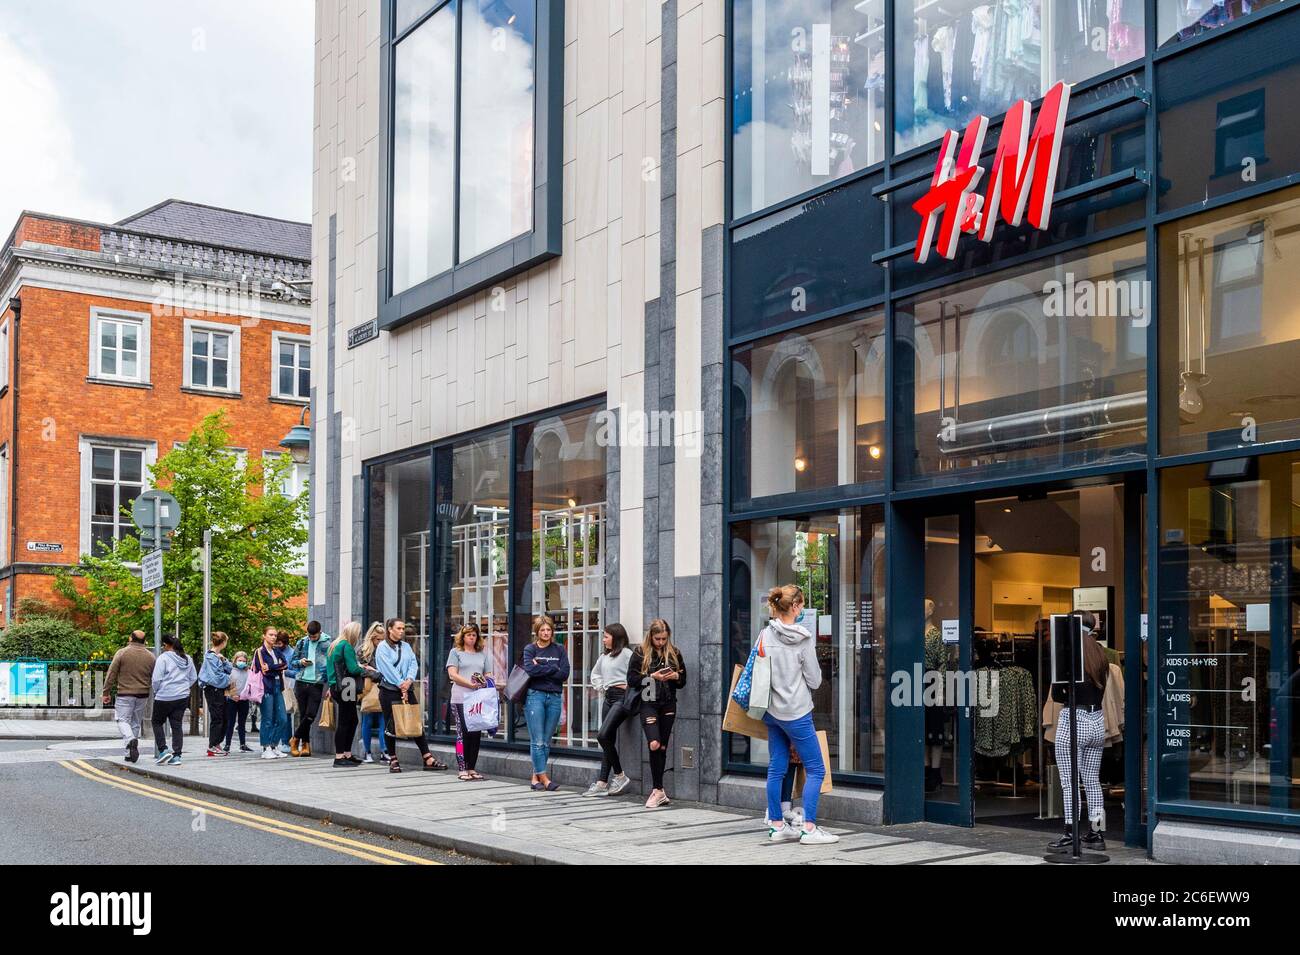 Cork, Ireland. 9th July, 2020. H&M clothes store in Opera Lane, Cork city,  was open today with a big queue of shoppers waiting to enter the store. H&M  is closing 170 of